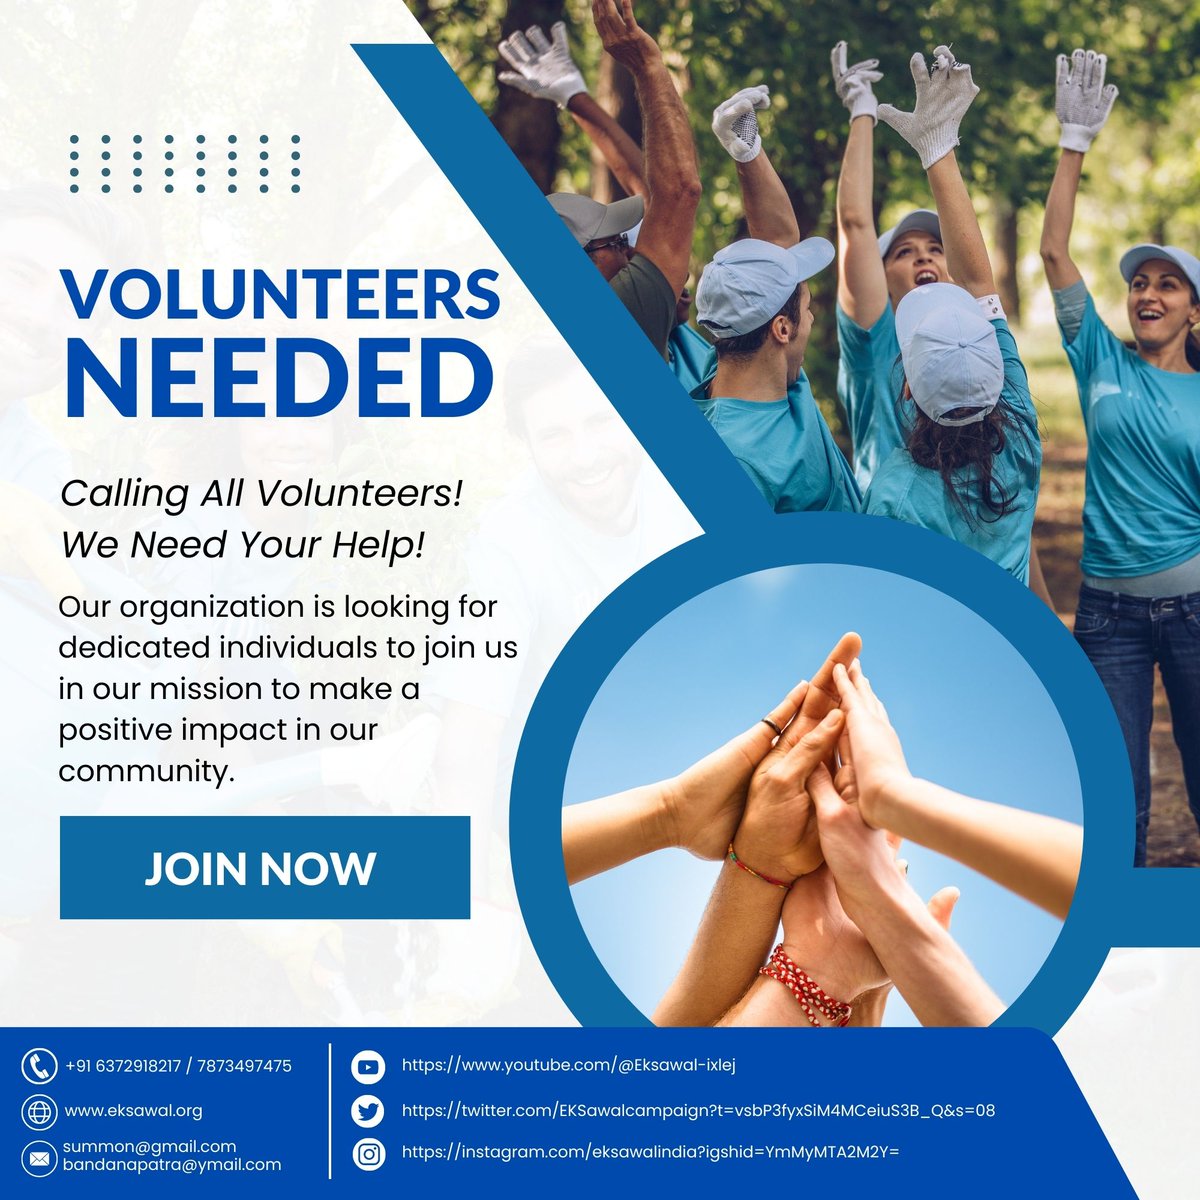 We're on a mission to destigmatize mental health and provide support to those in need.  #VolunteerOpportunity #TogetherForChange #VolunteersNeeded #CallingAllVolunteers #VolunteerOpportunity #JoinTheCause #MakeADifference #GiveBack #VolunteerRecruitment #Eksawal